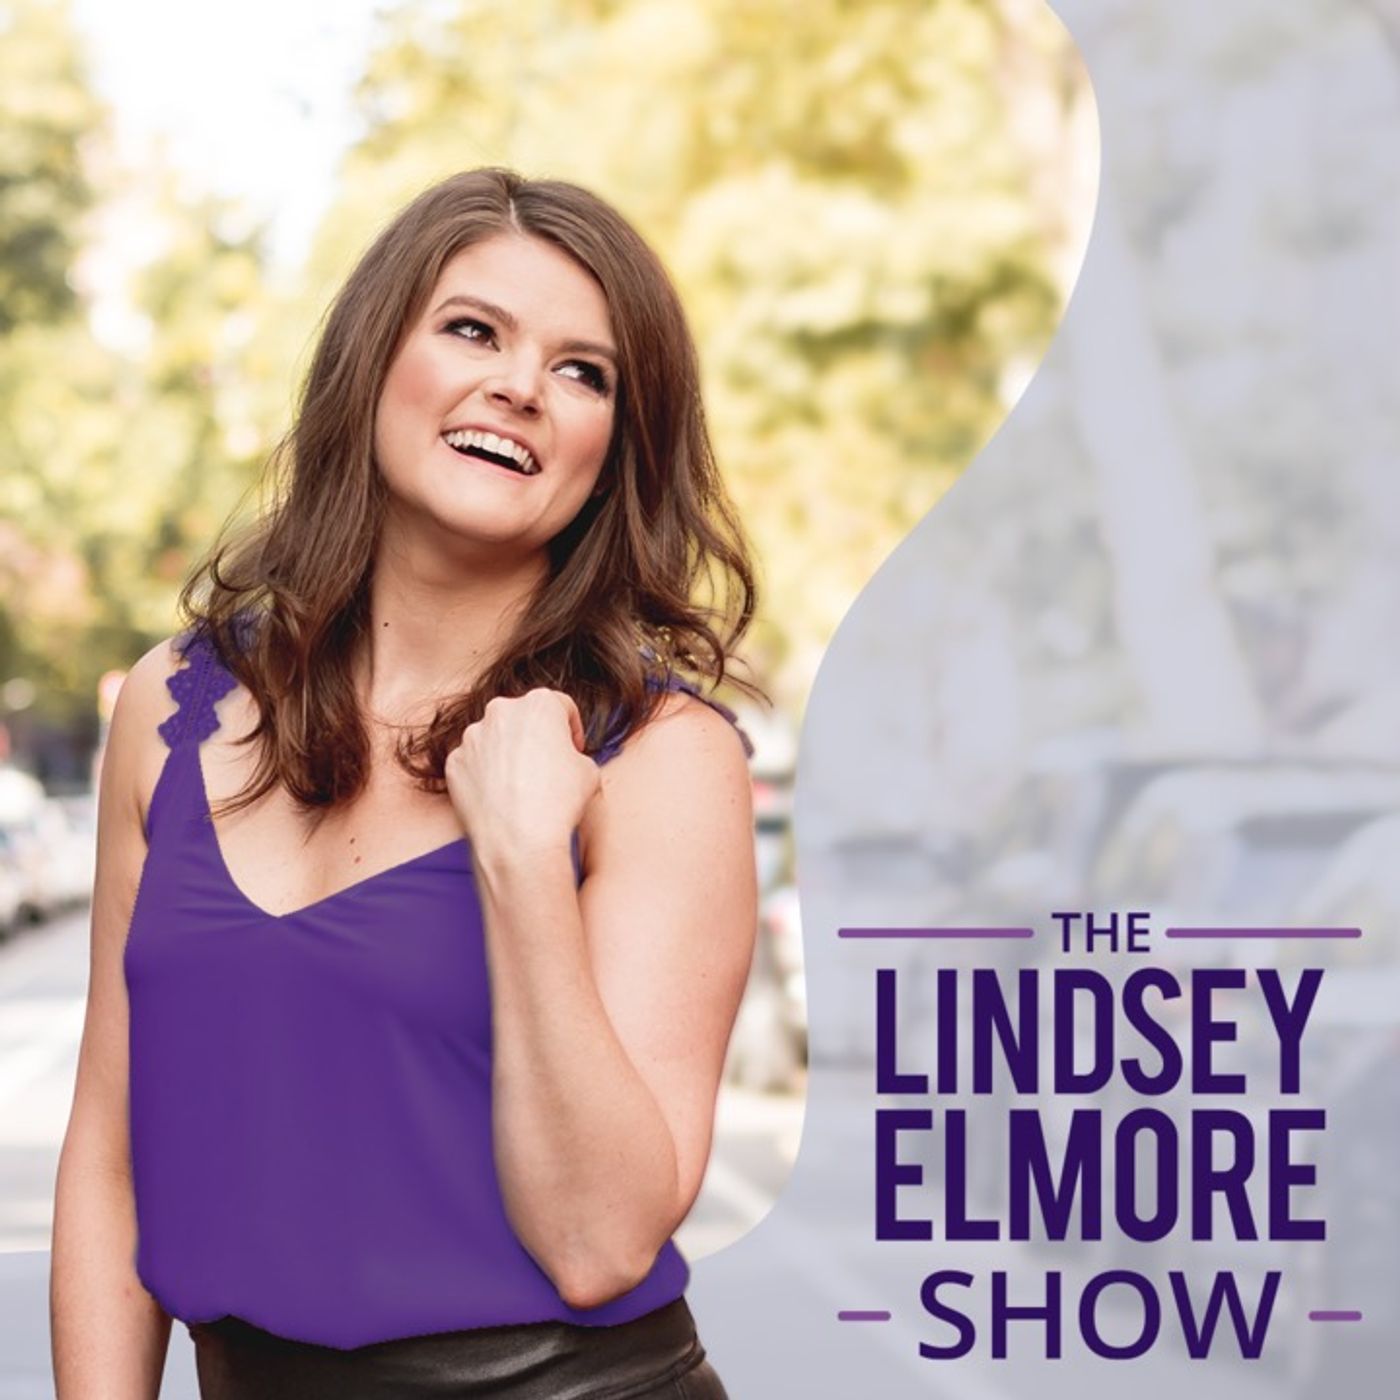 Welcome to The Lindsey Elmore Show